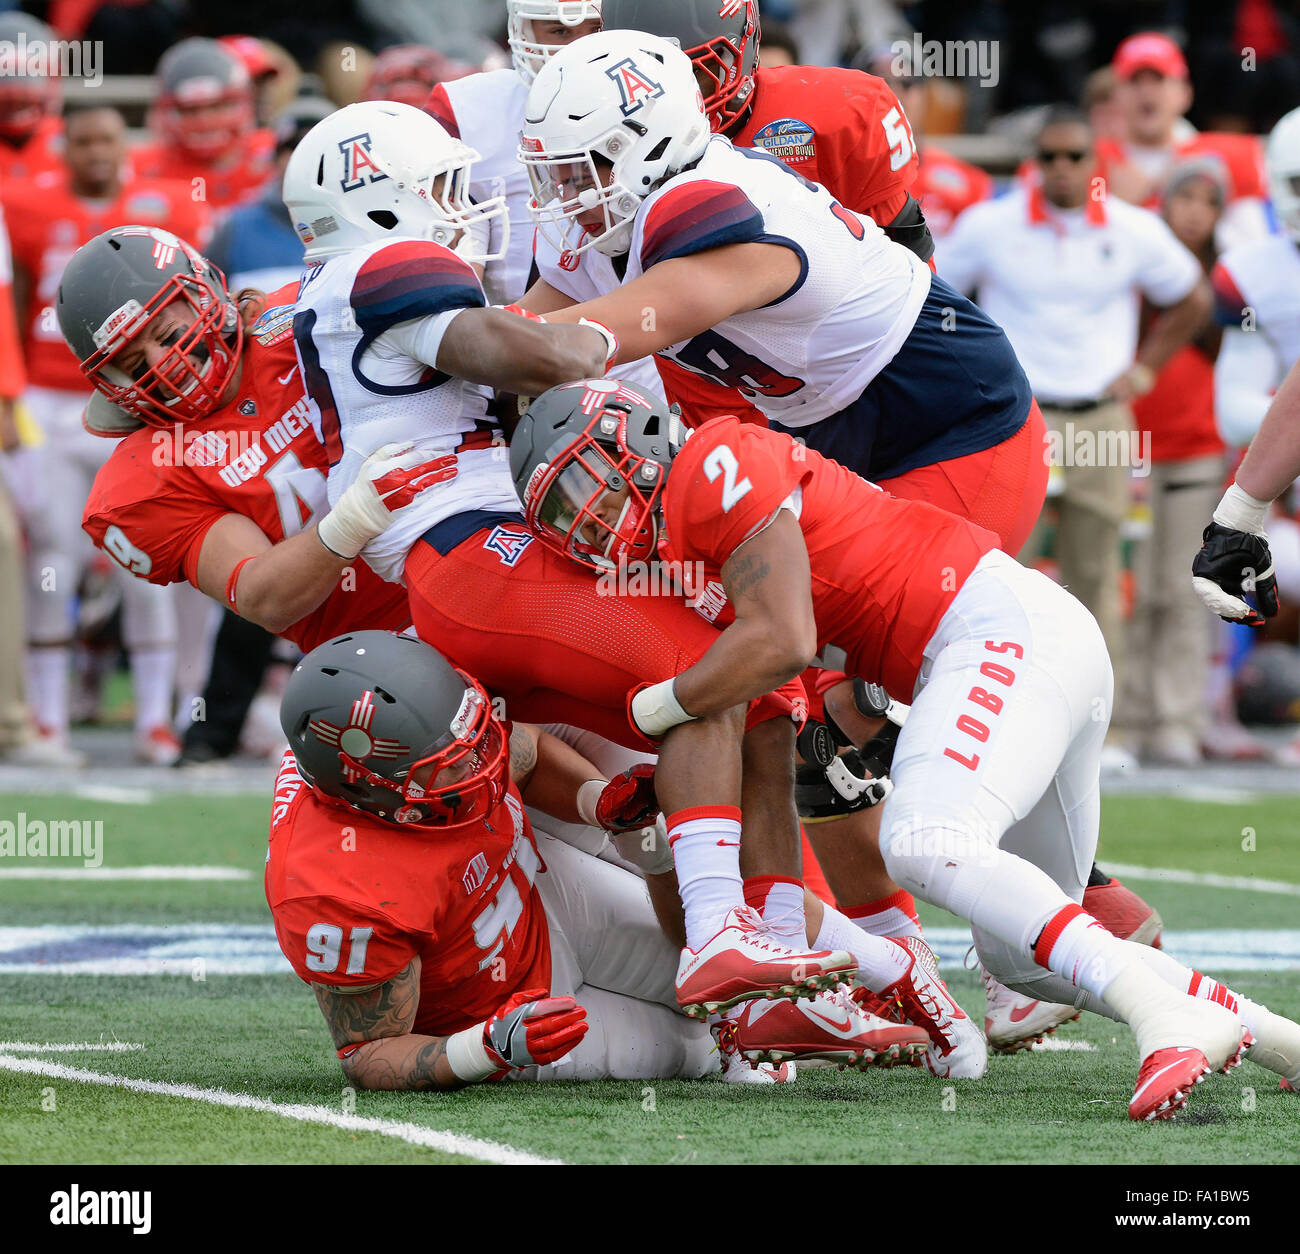 Albuquerque, New Mexico, USA. 19th Dec, 2015. New Mexico Lobos' DAKOTA COX, KIMMIE CARSON and NIK D'AVANZO stop Arizona Wilcats' JARED BAKER in the first half of NCAA Football action at Branch Field. © Jim Thompson/Albuquerque Journal/ZUMA Wire/Alamy Live News Stock Photo